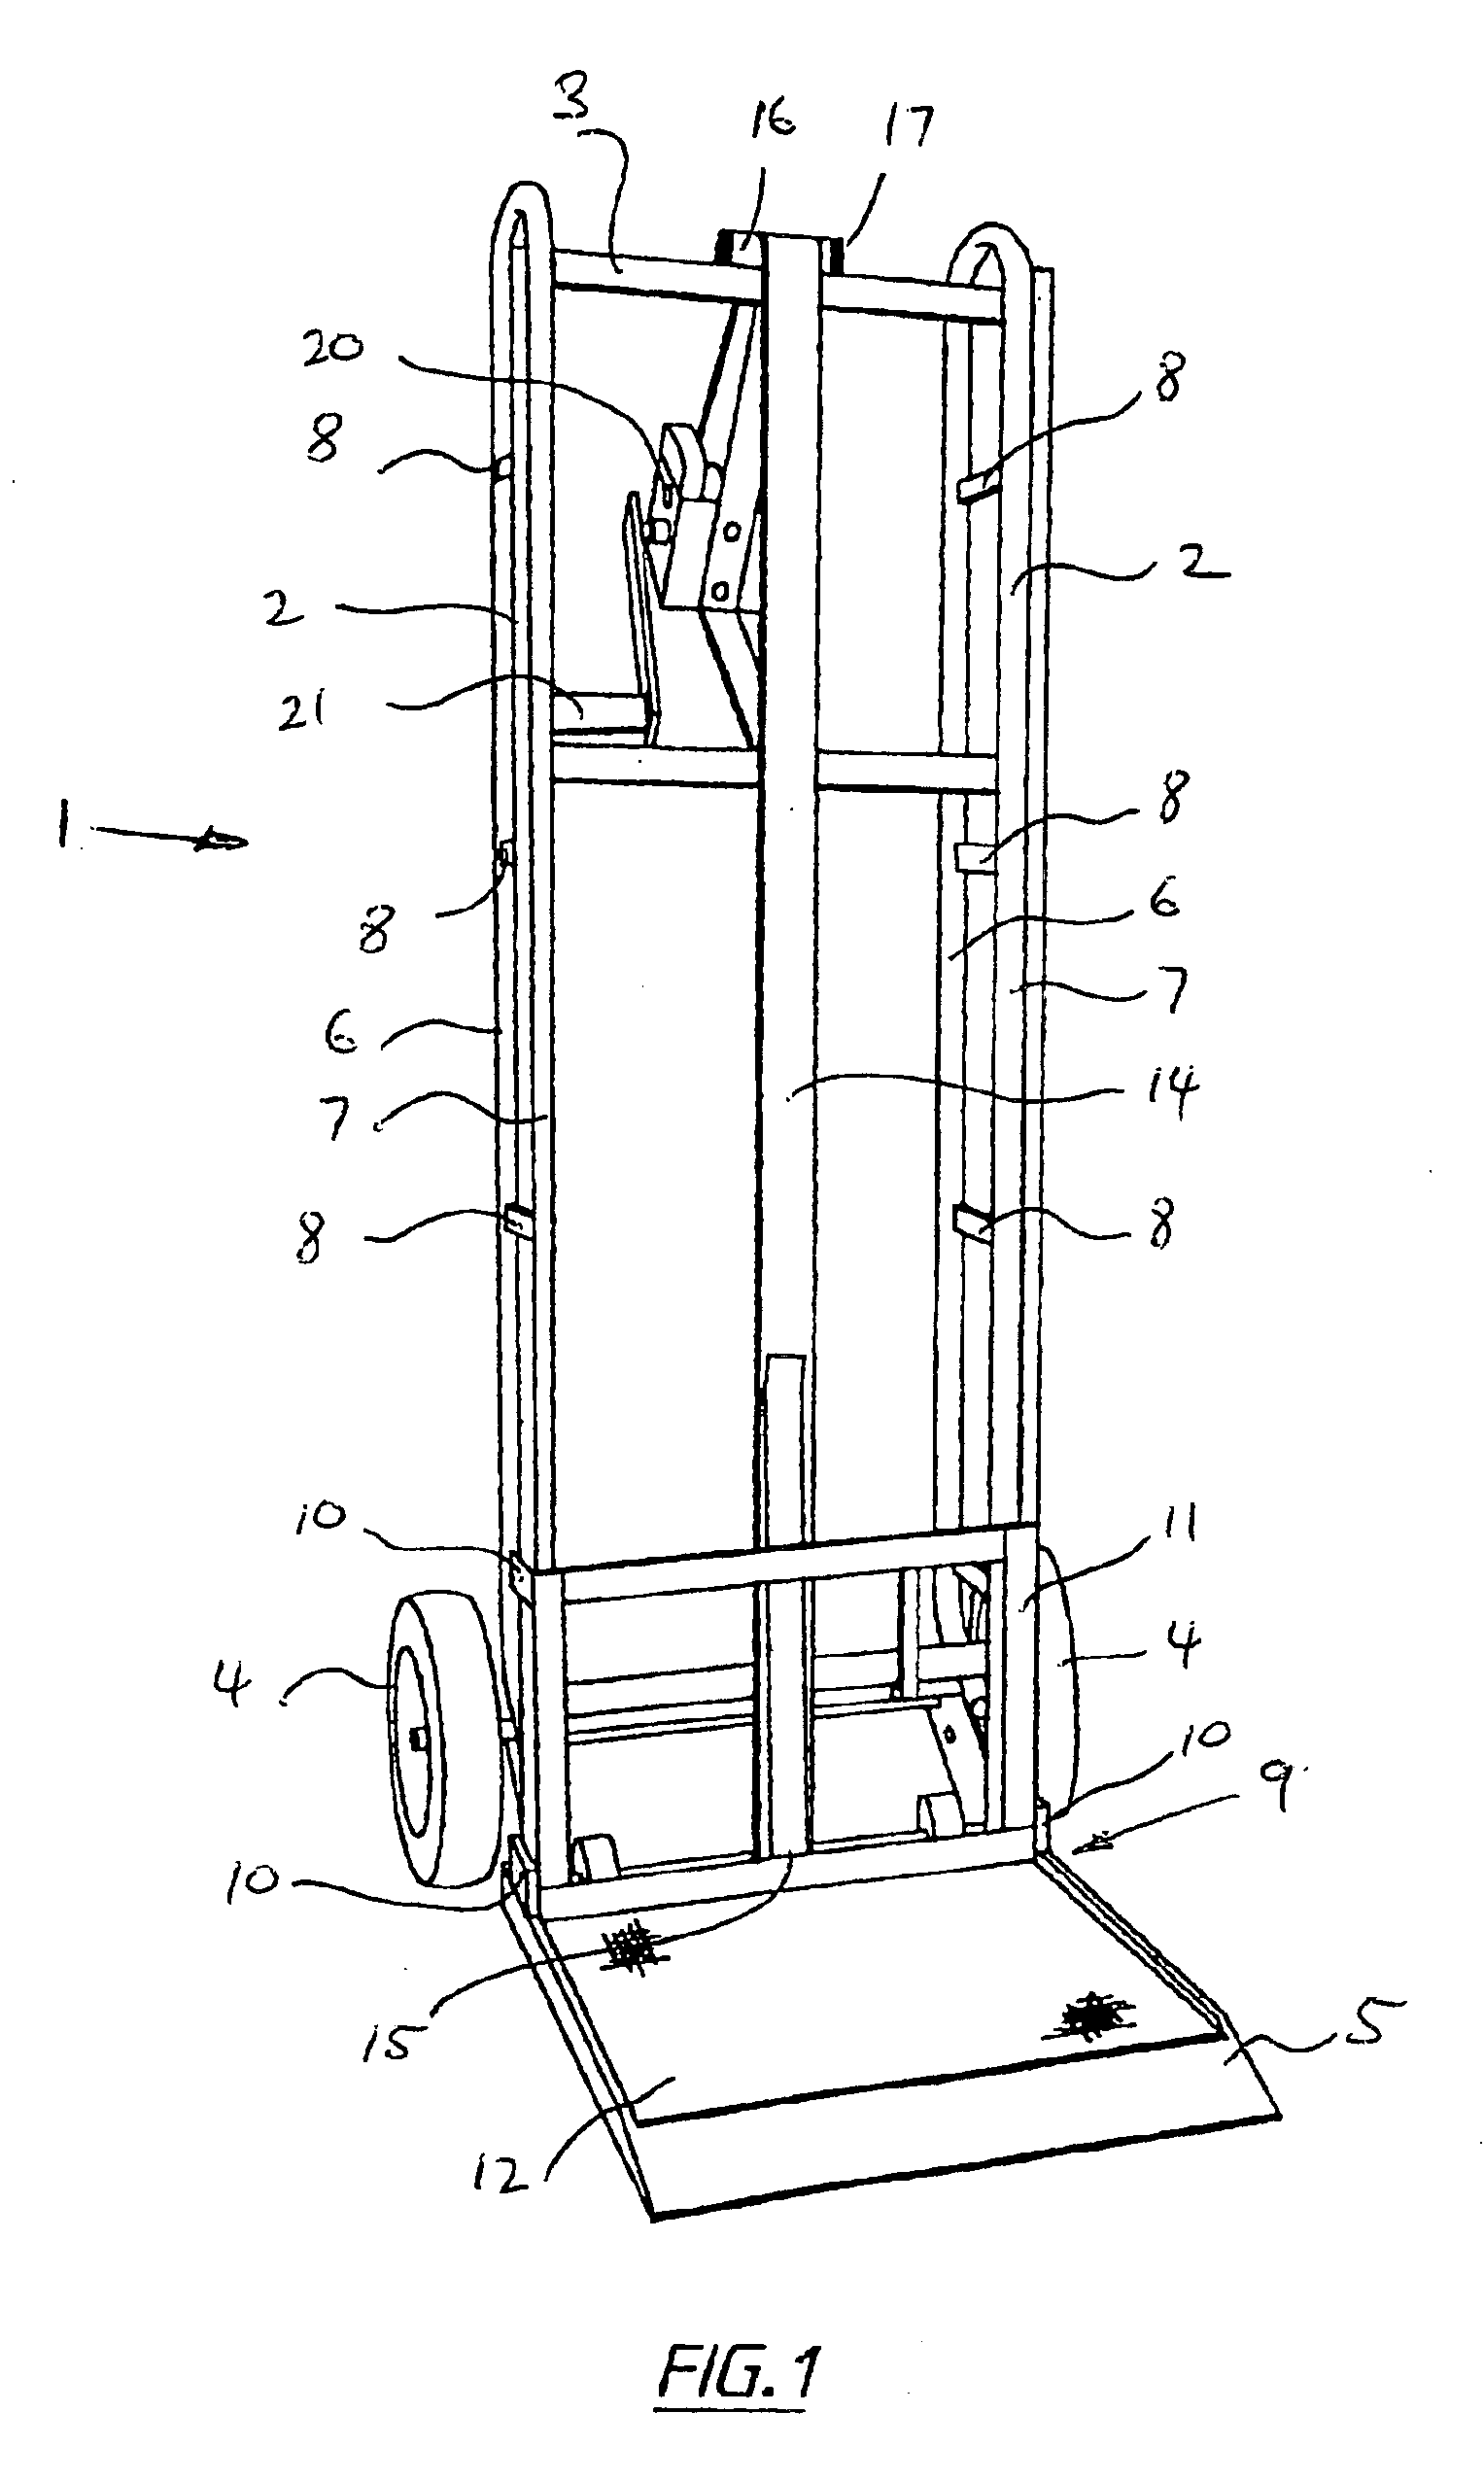 Hand trolley with winch operated lifting carriage